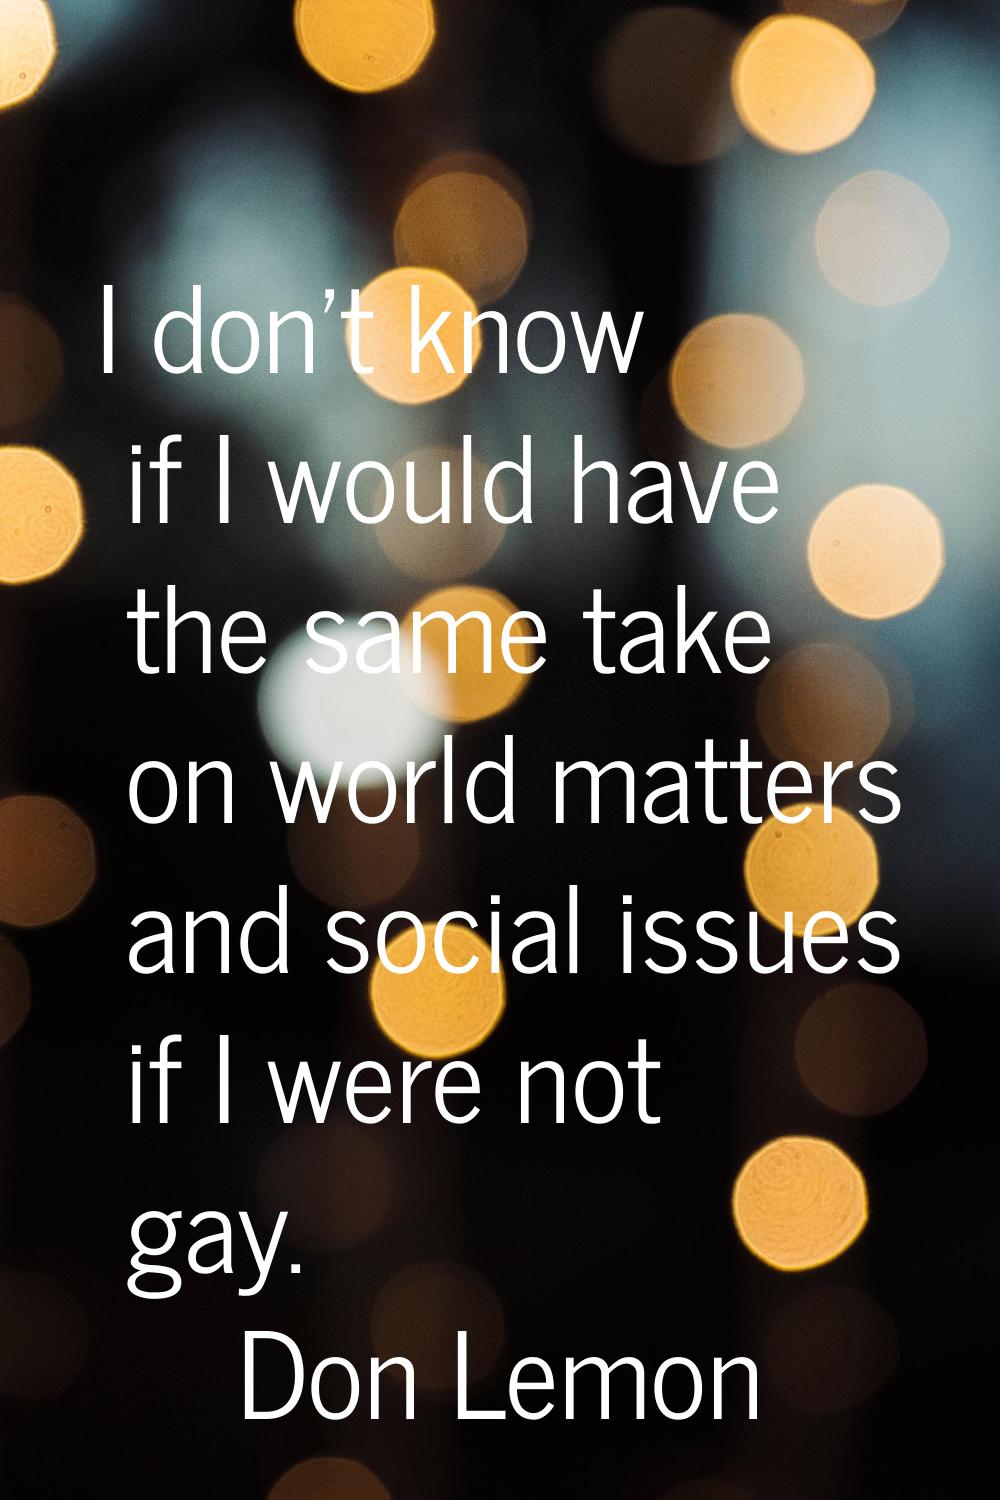 I don't know if I would have the same take on world matters and social issues if I were not gay.